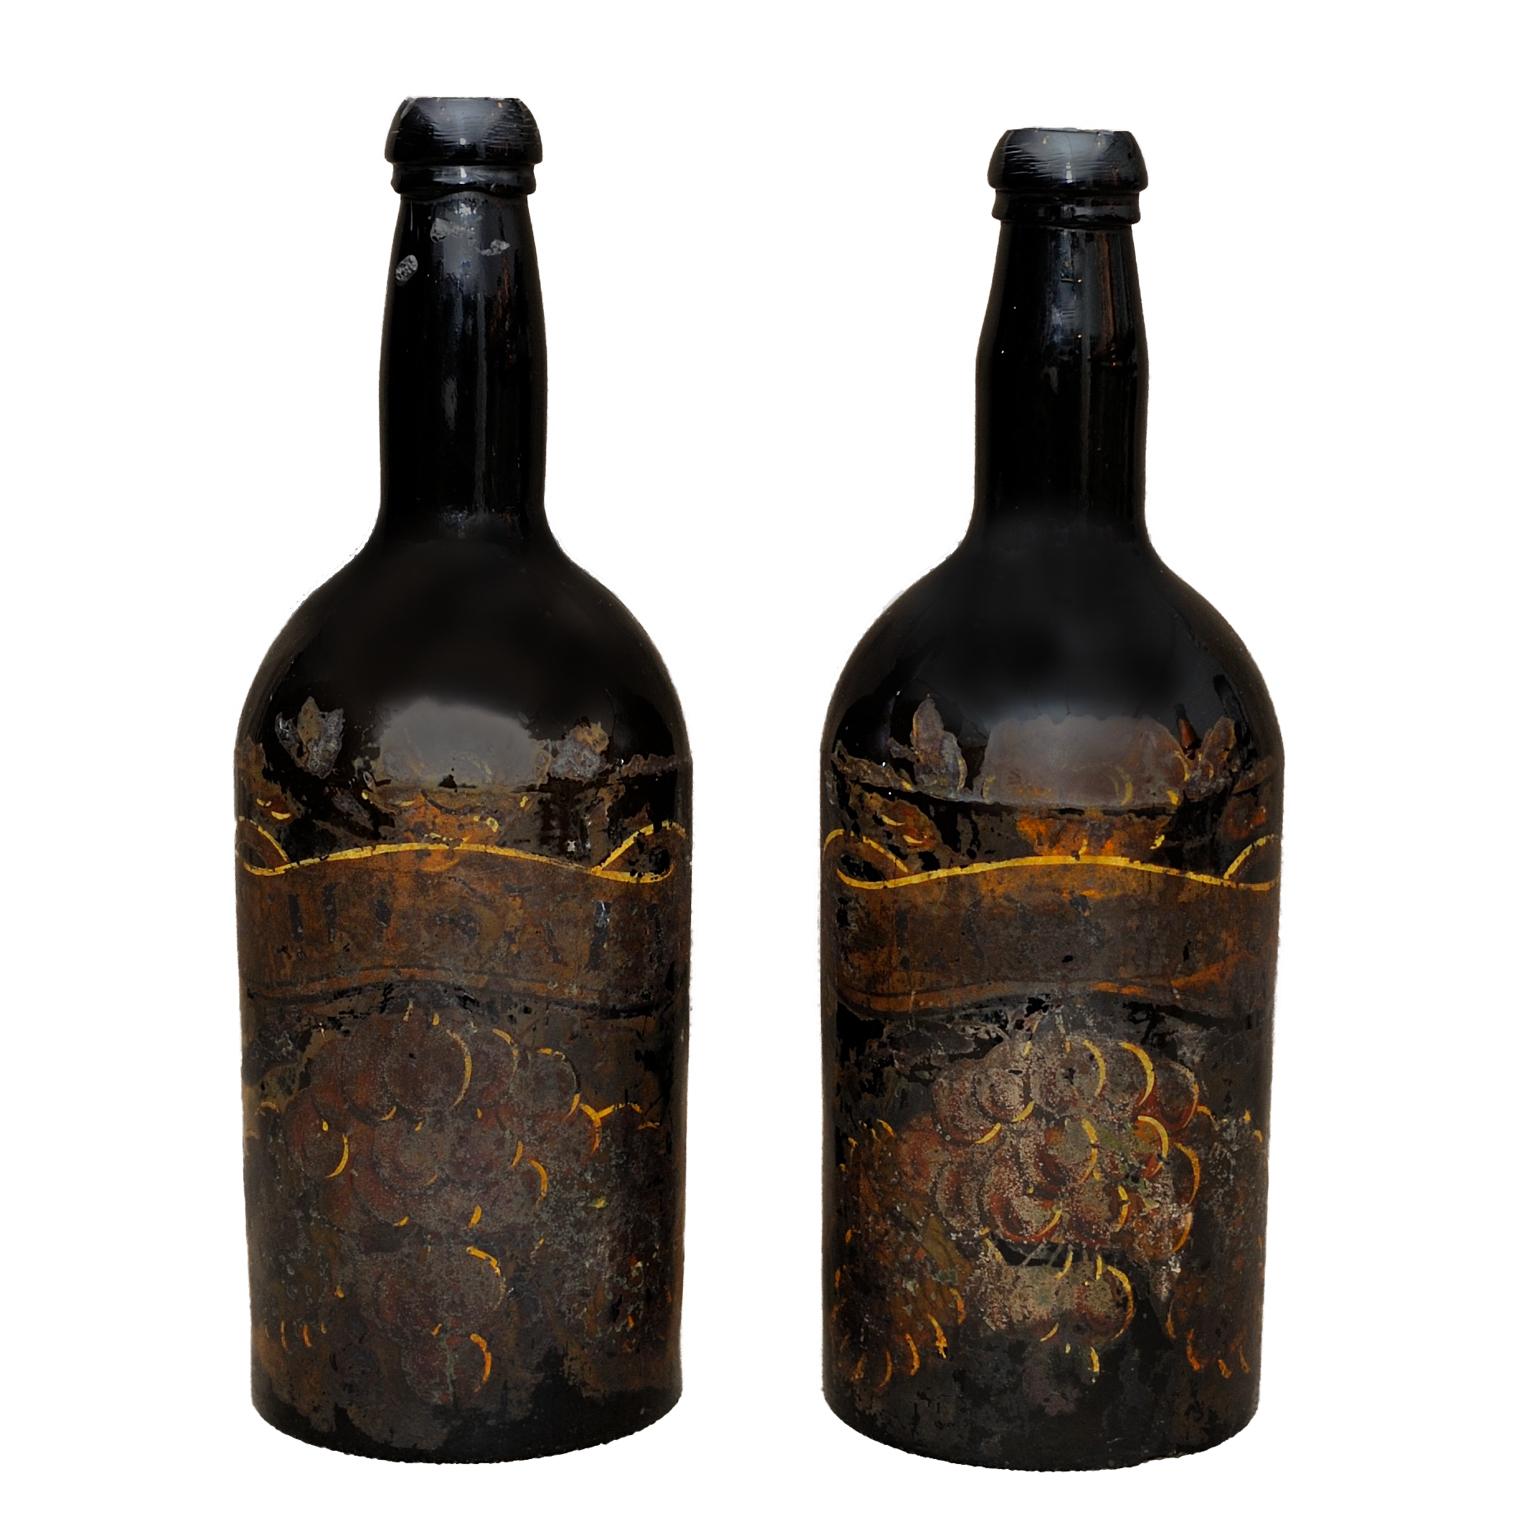 This is a beautifully decorative pair of large English late 18th century George III decorated wine bottles, circa 1780.

They would make fine water carafes or perhaps lamp bases.